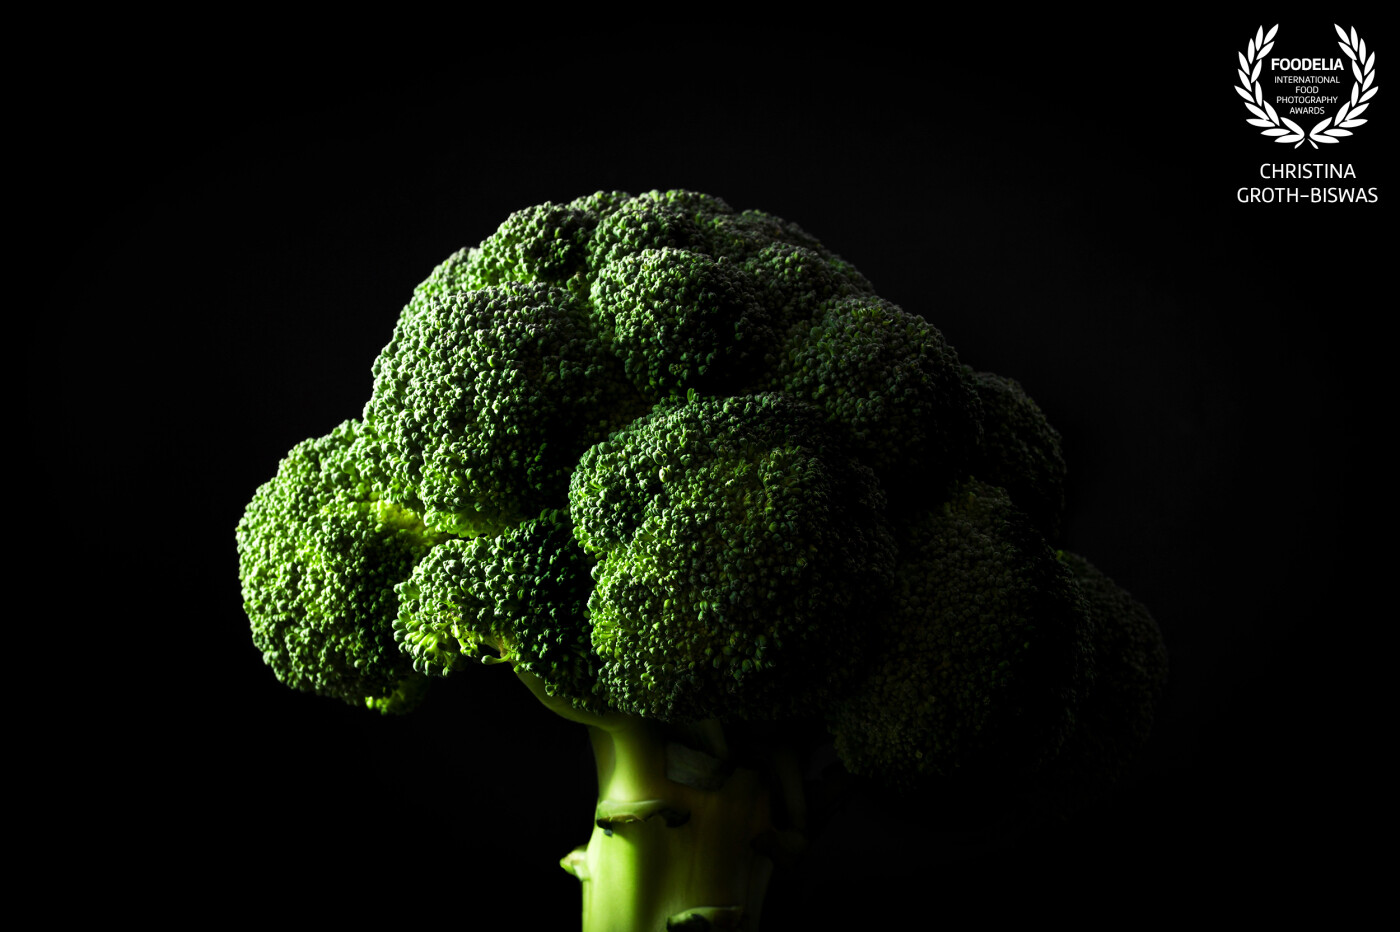 Portrait of an organic broccoli. This one was so fresh and perfect that I had to take its picture using only one artificial light source.